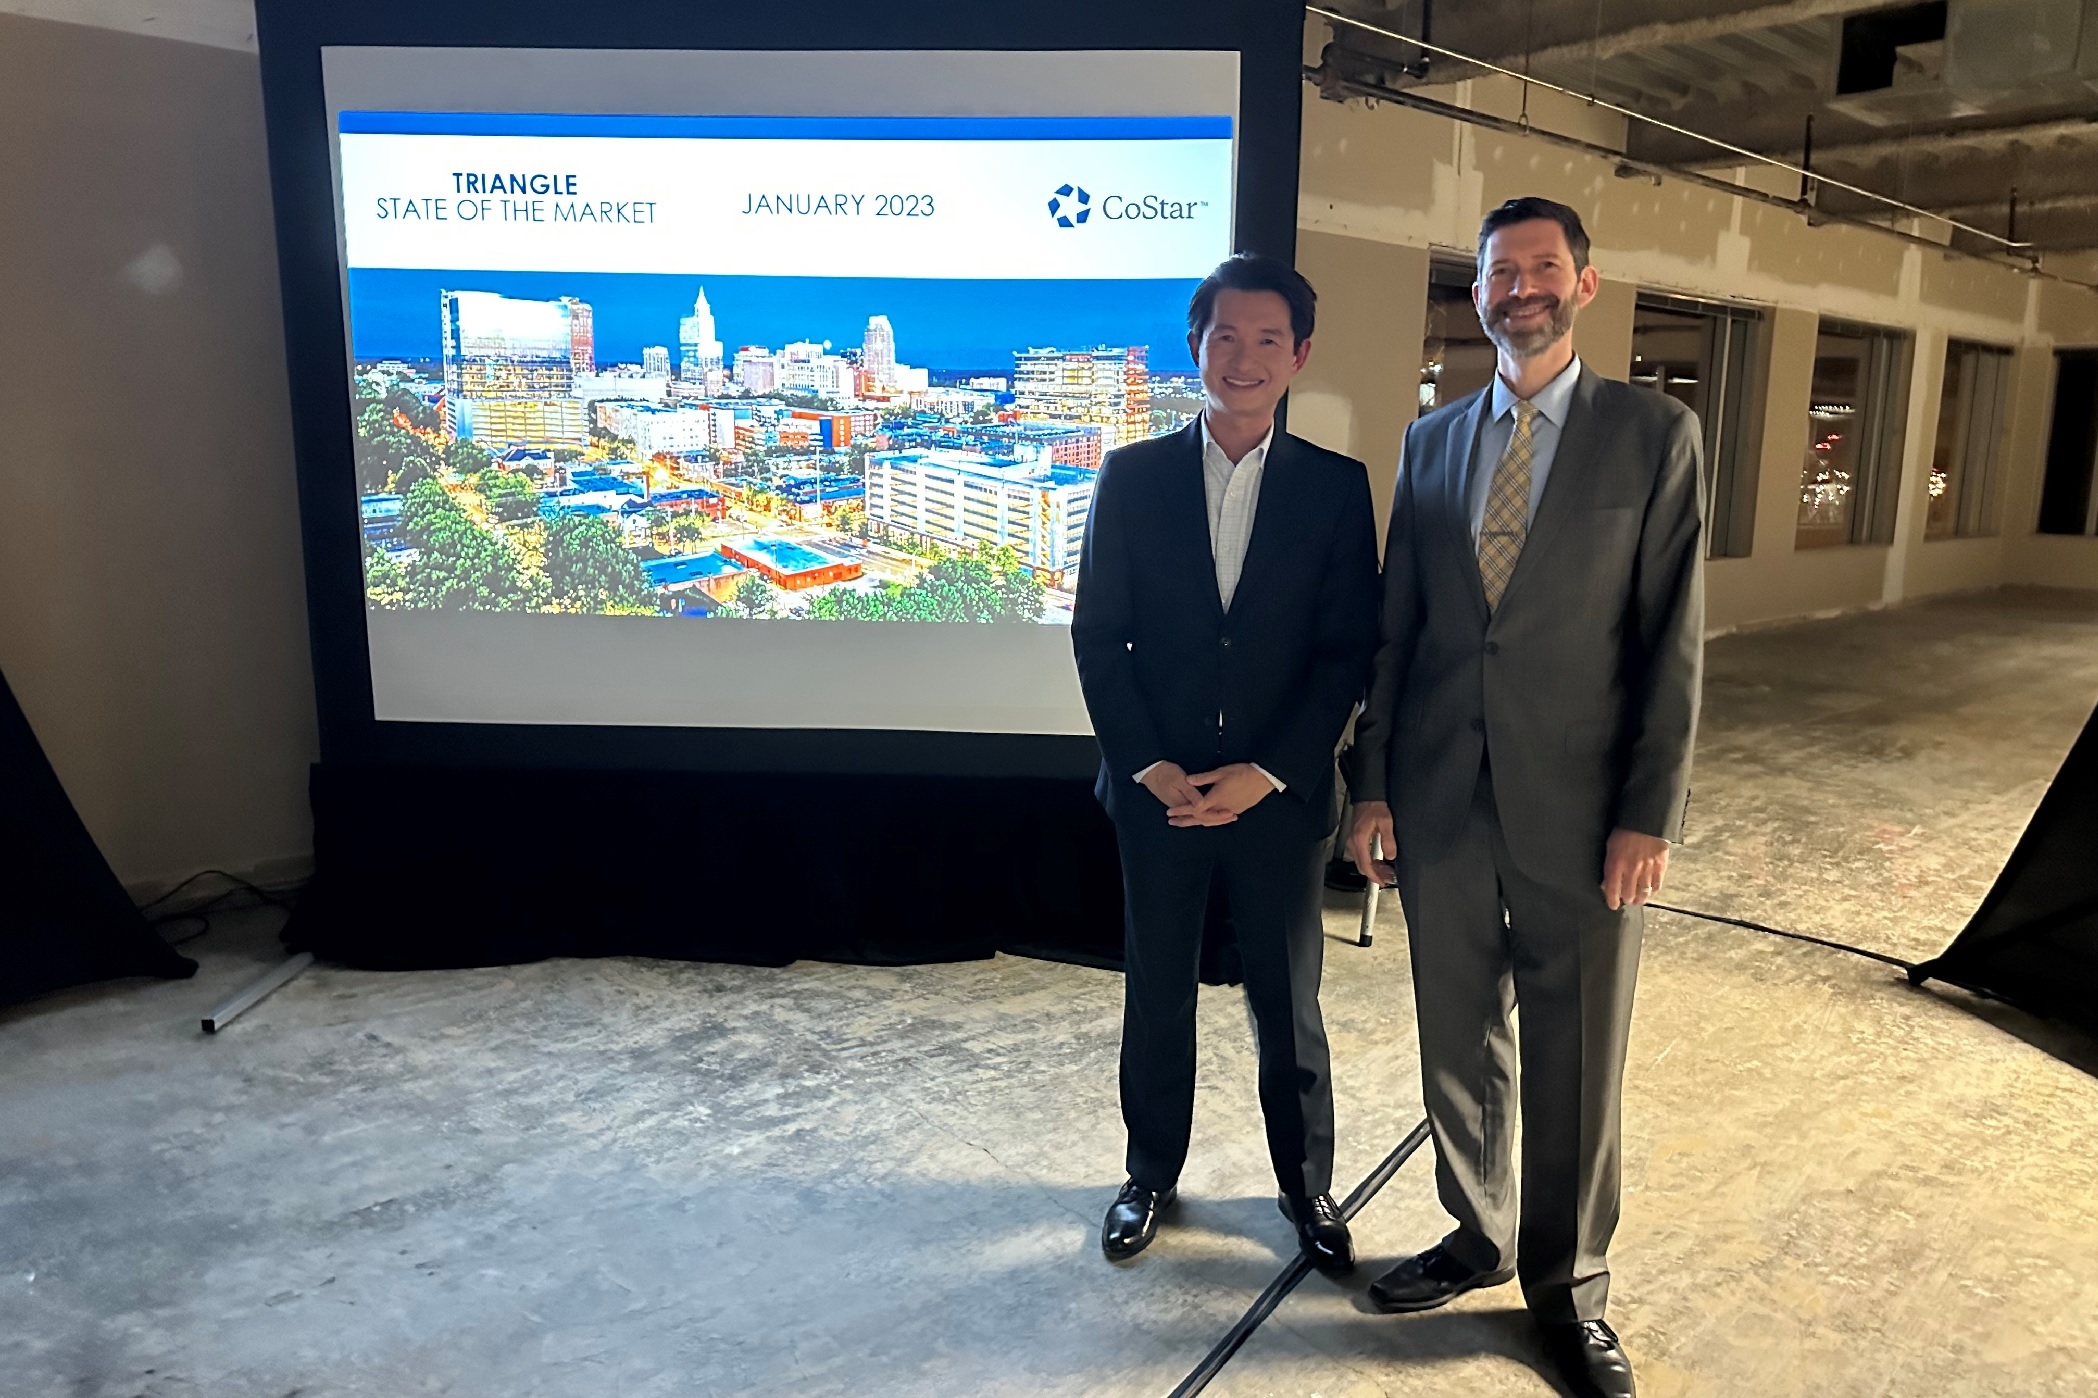 Christopher Chung, left, is the CEO of the Economic Development Partnership of North Carolina. (CoStar)